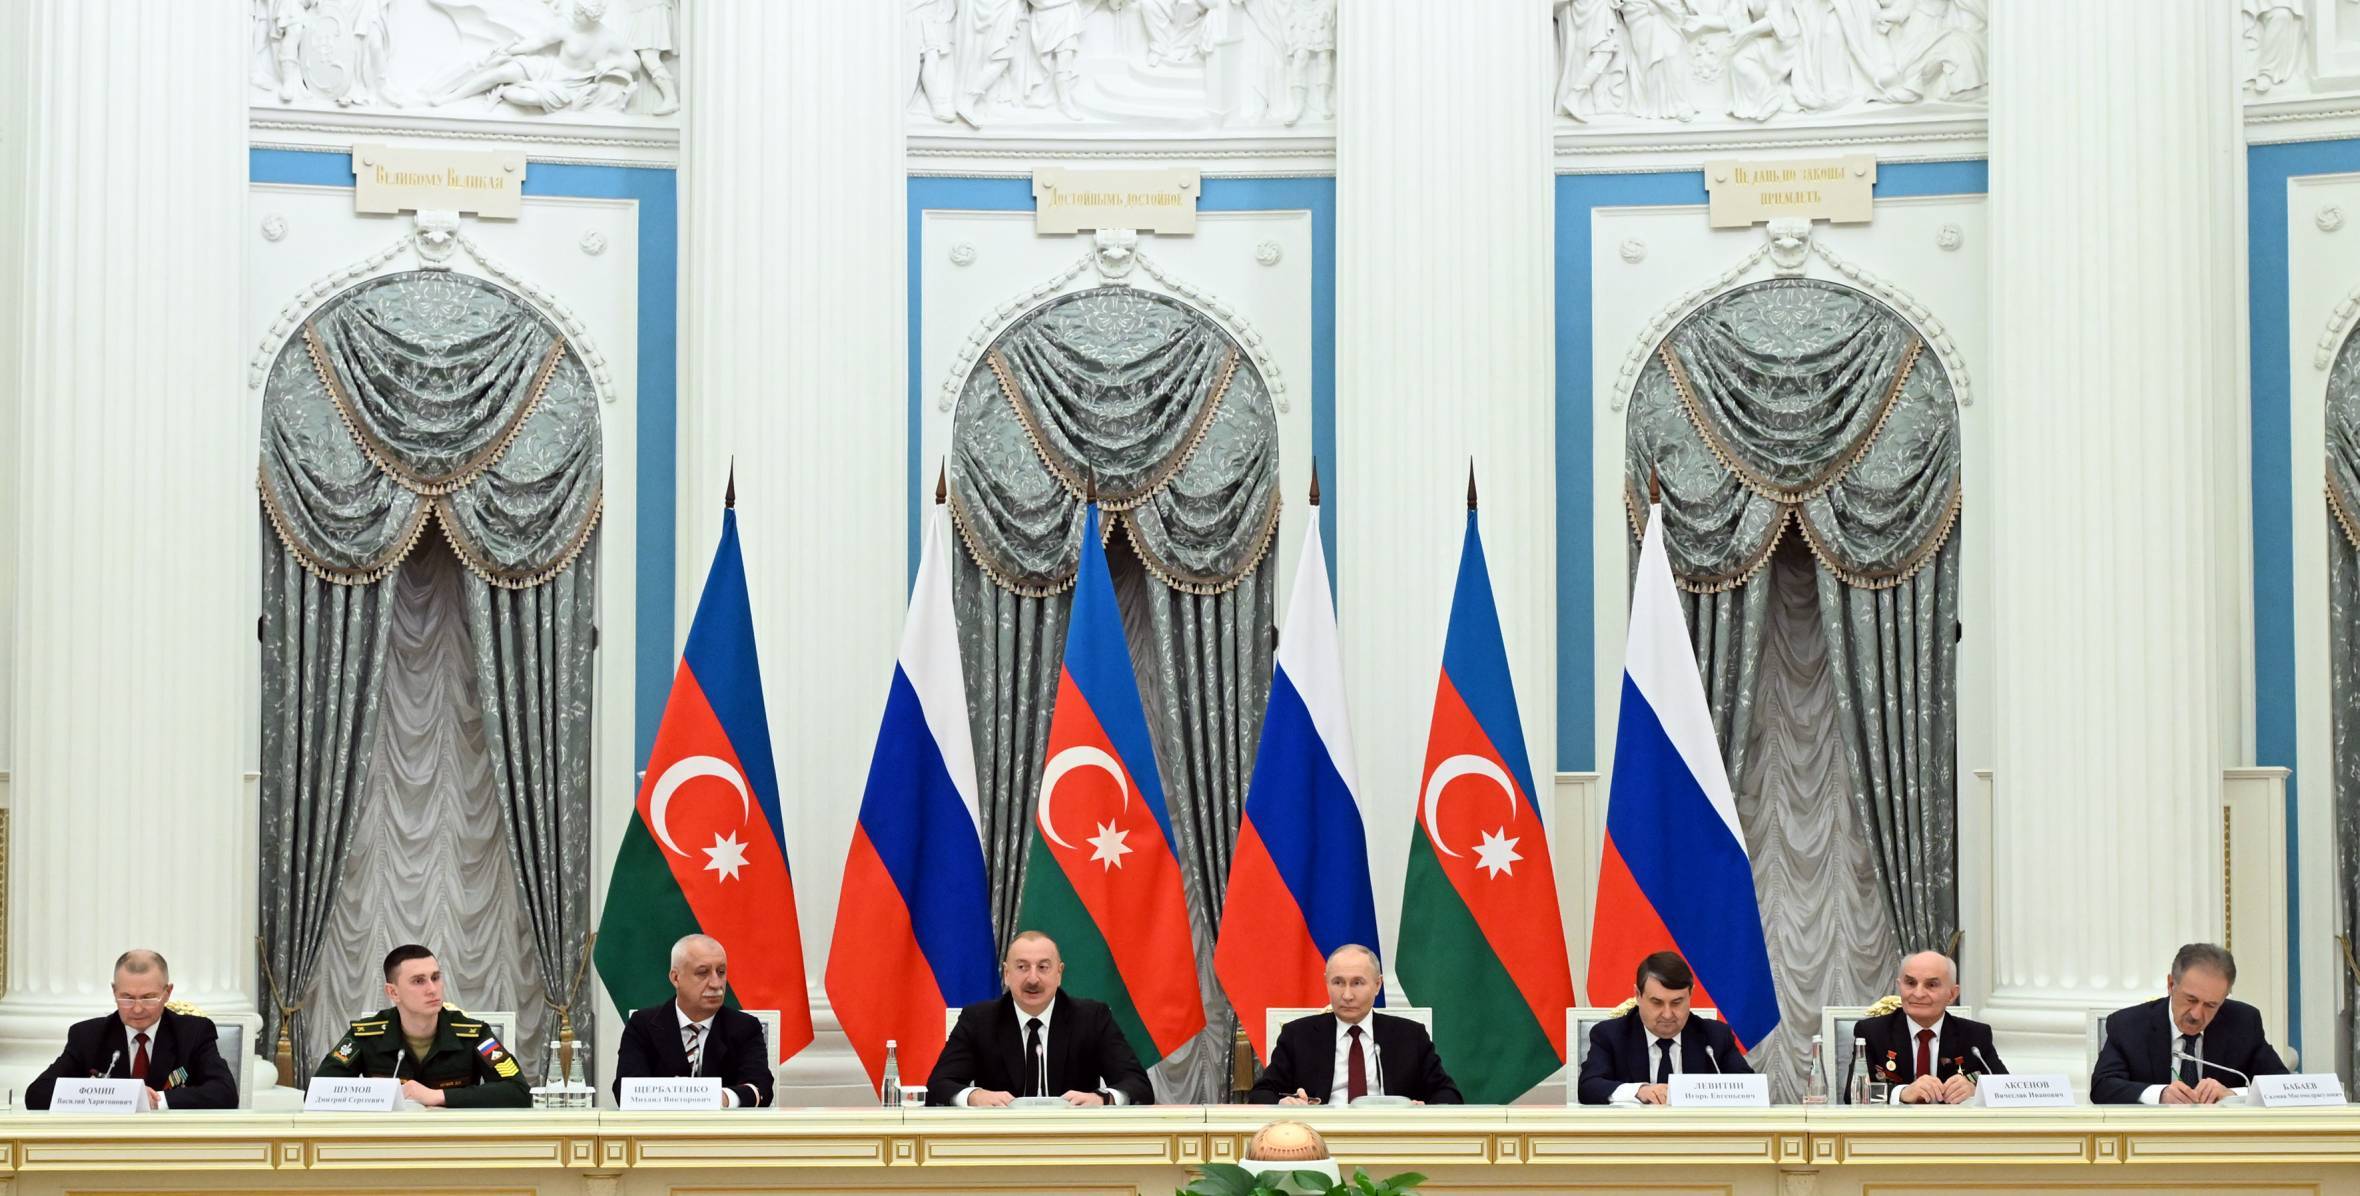 Speech by Ilham Aliyev at the joint meeting between Azerbaijani and Russian Presidents with railway veterans and workers on the occasion of the 50th anniversary of the Baikal-Amur Mainline